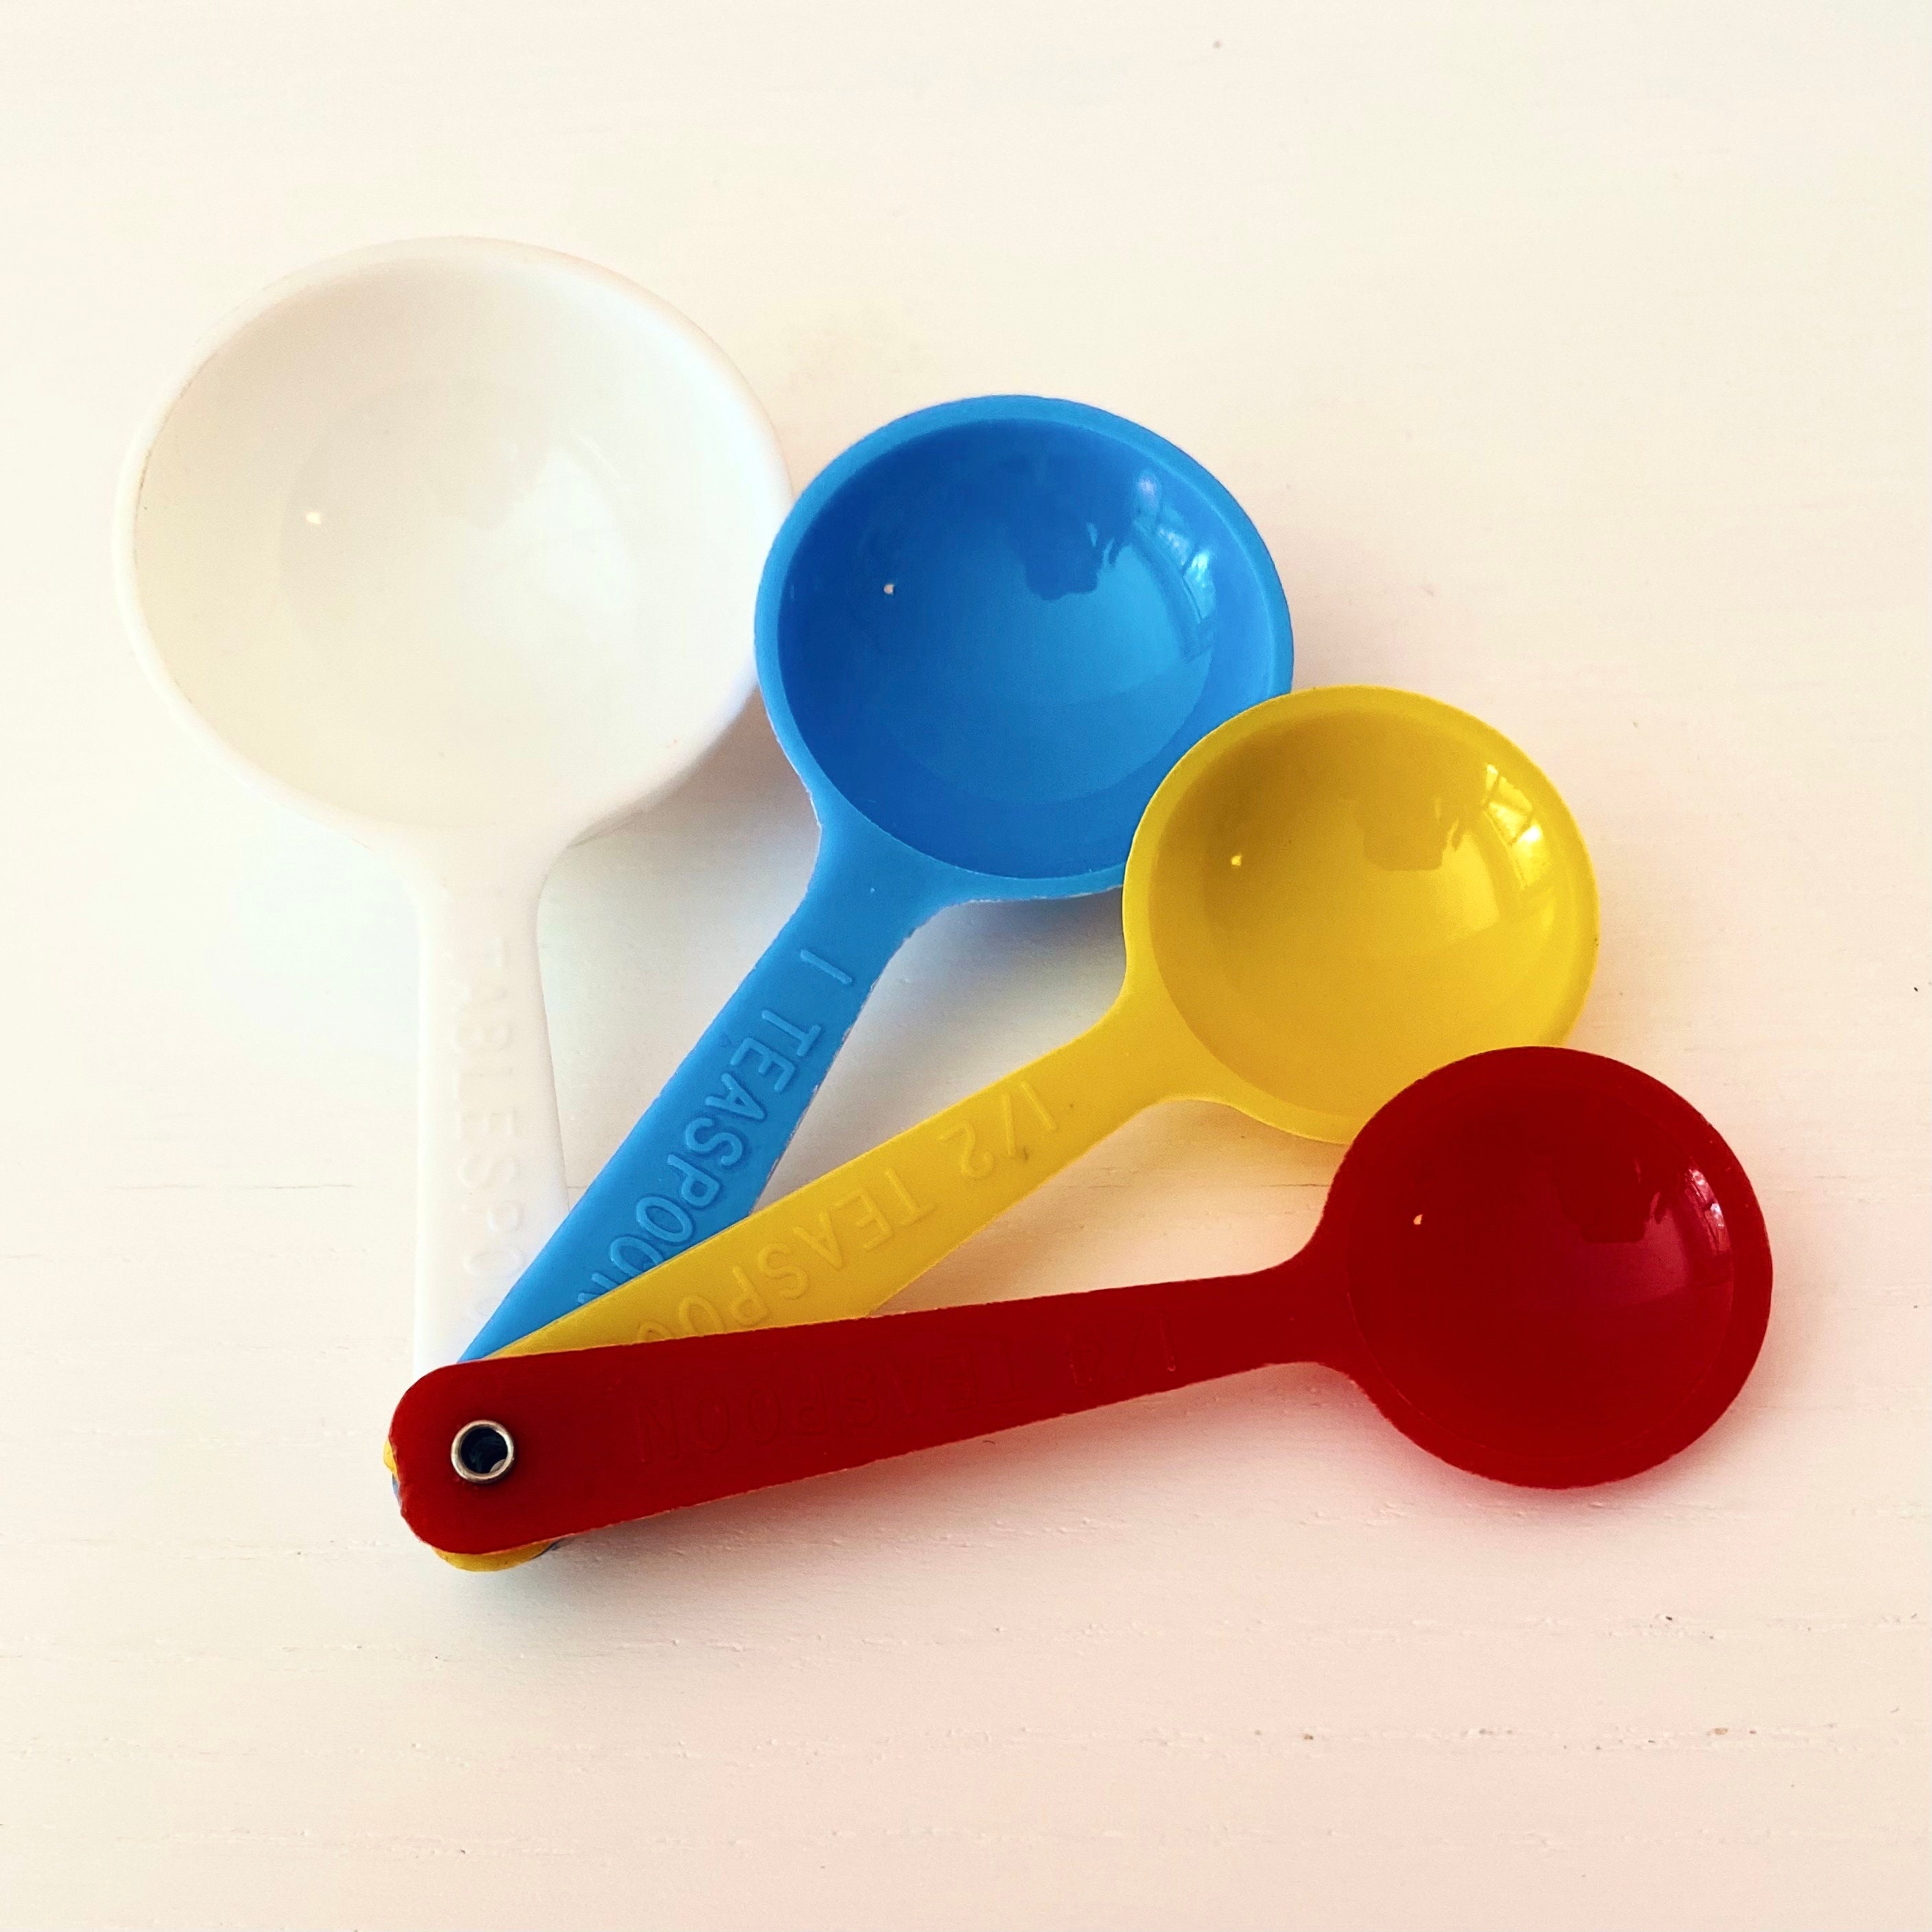 Vintage Plastic Nesting Measuring Spoons Vintage Childrens Measuring Spoons  1950s Colorful Baking and Cooking Spoon Set 